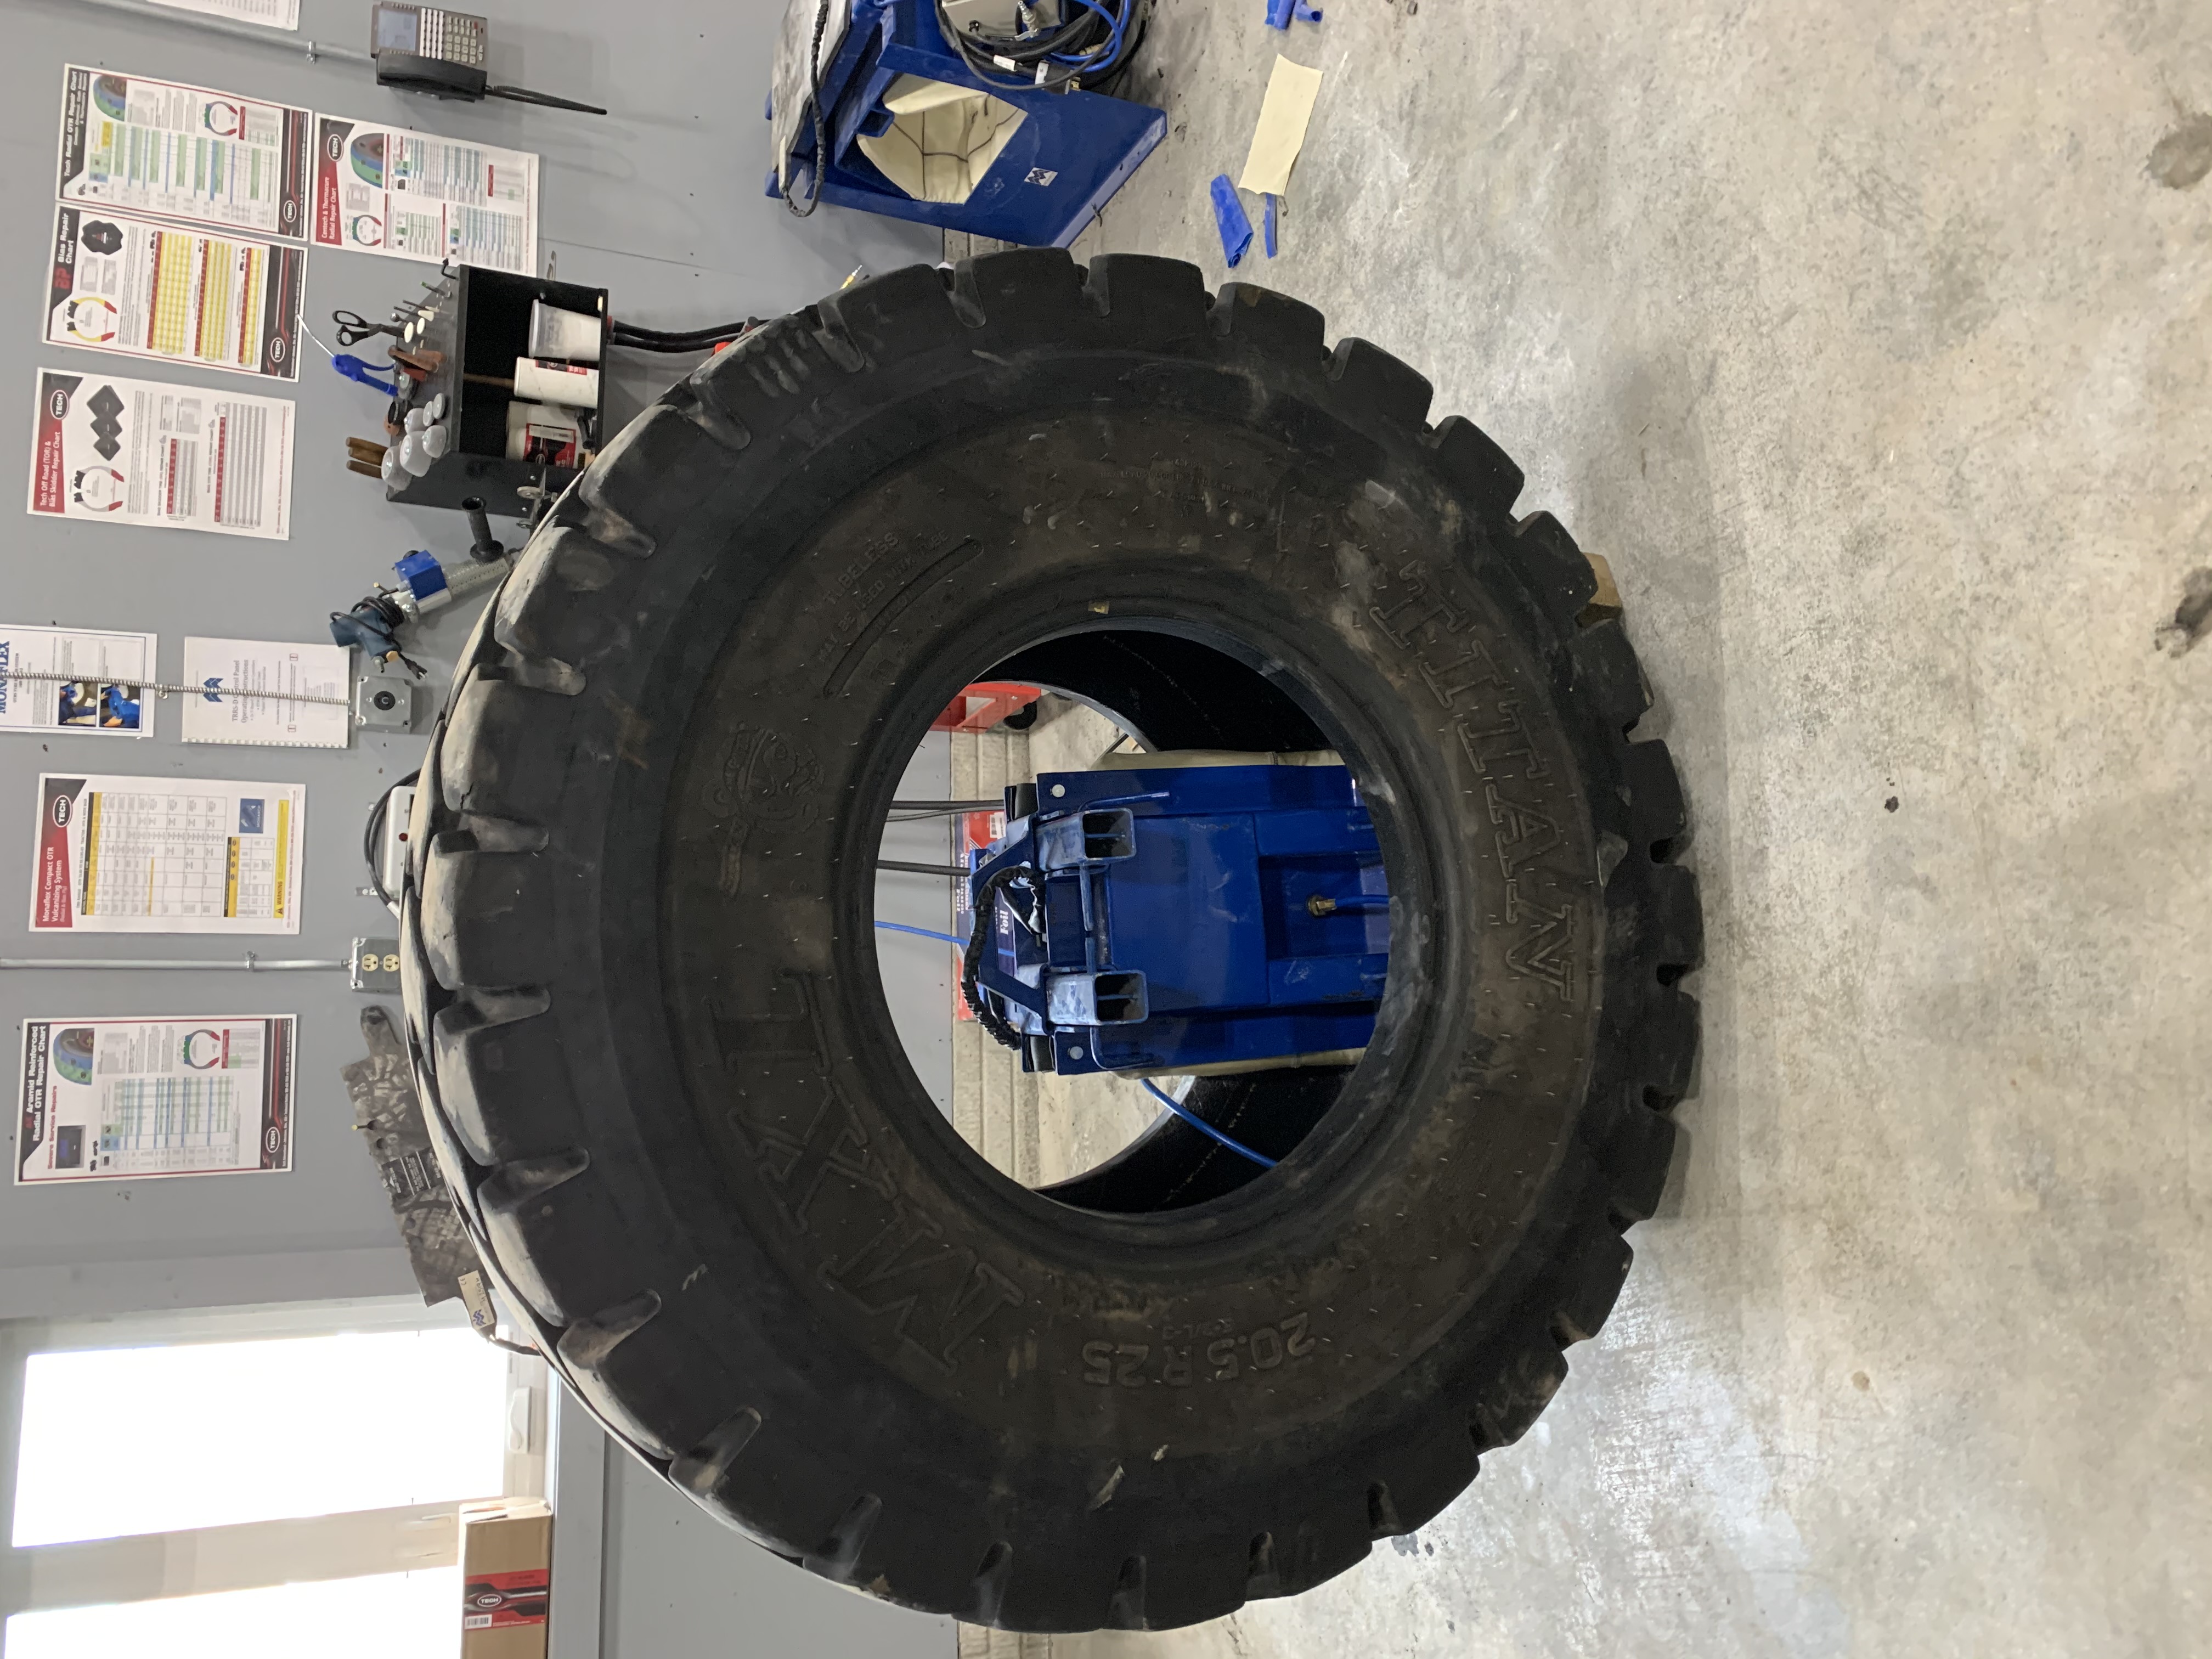 sectional repair on tires